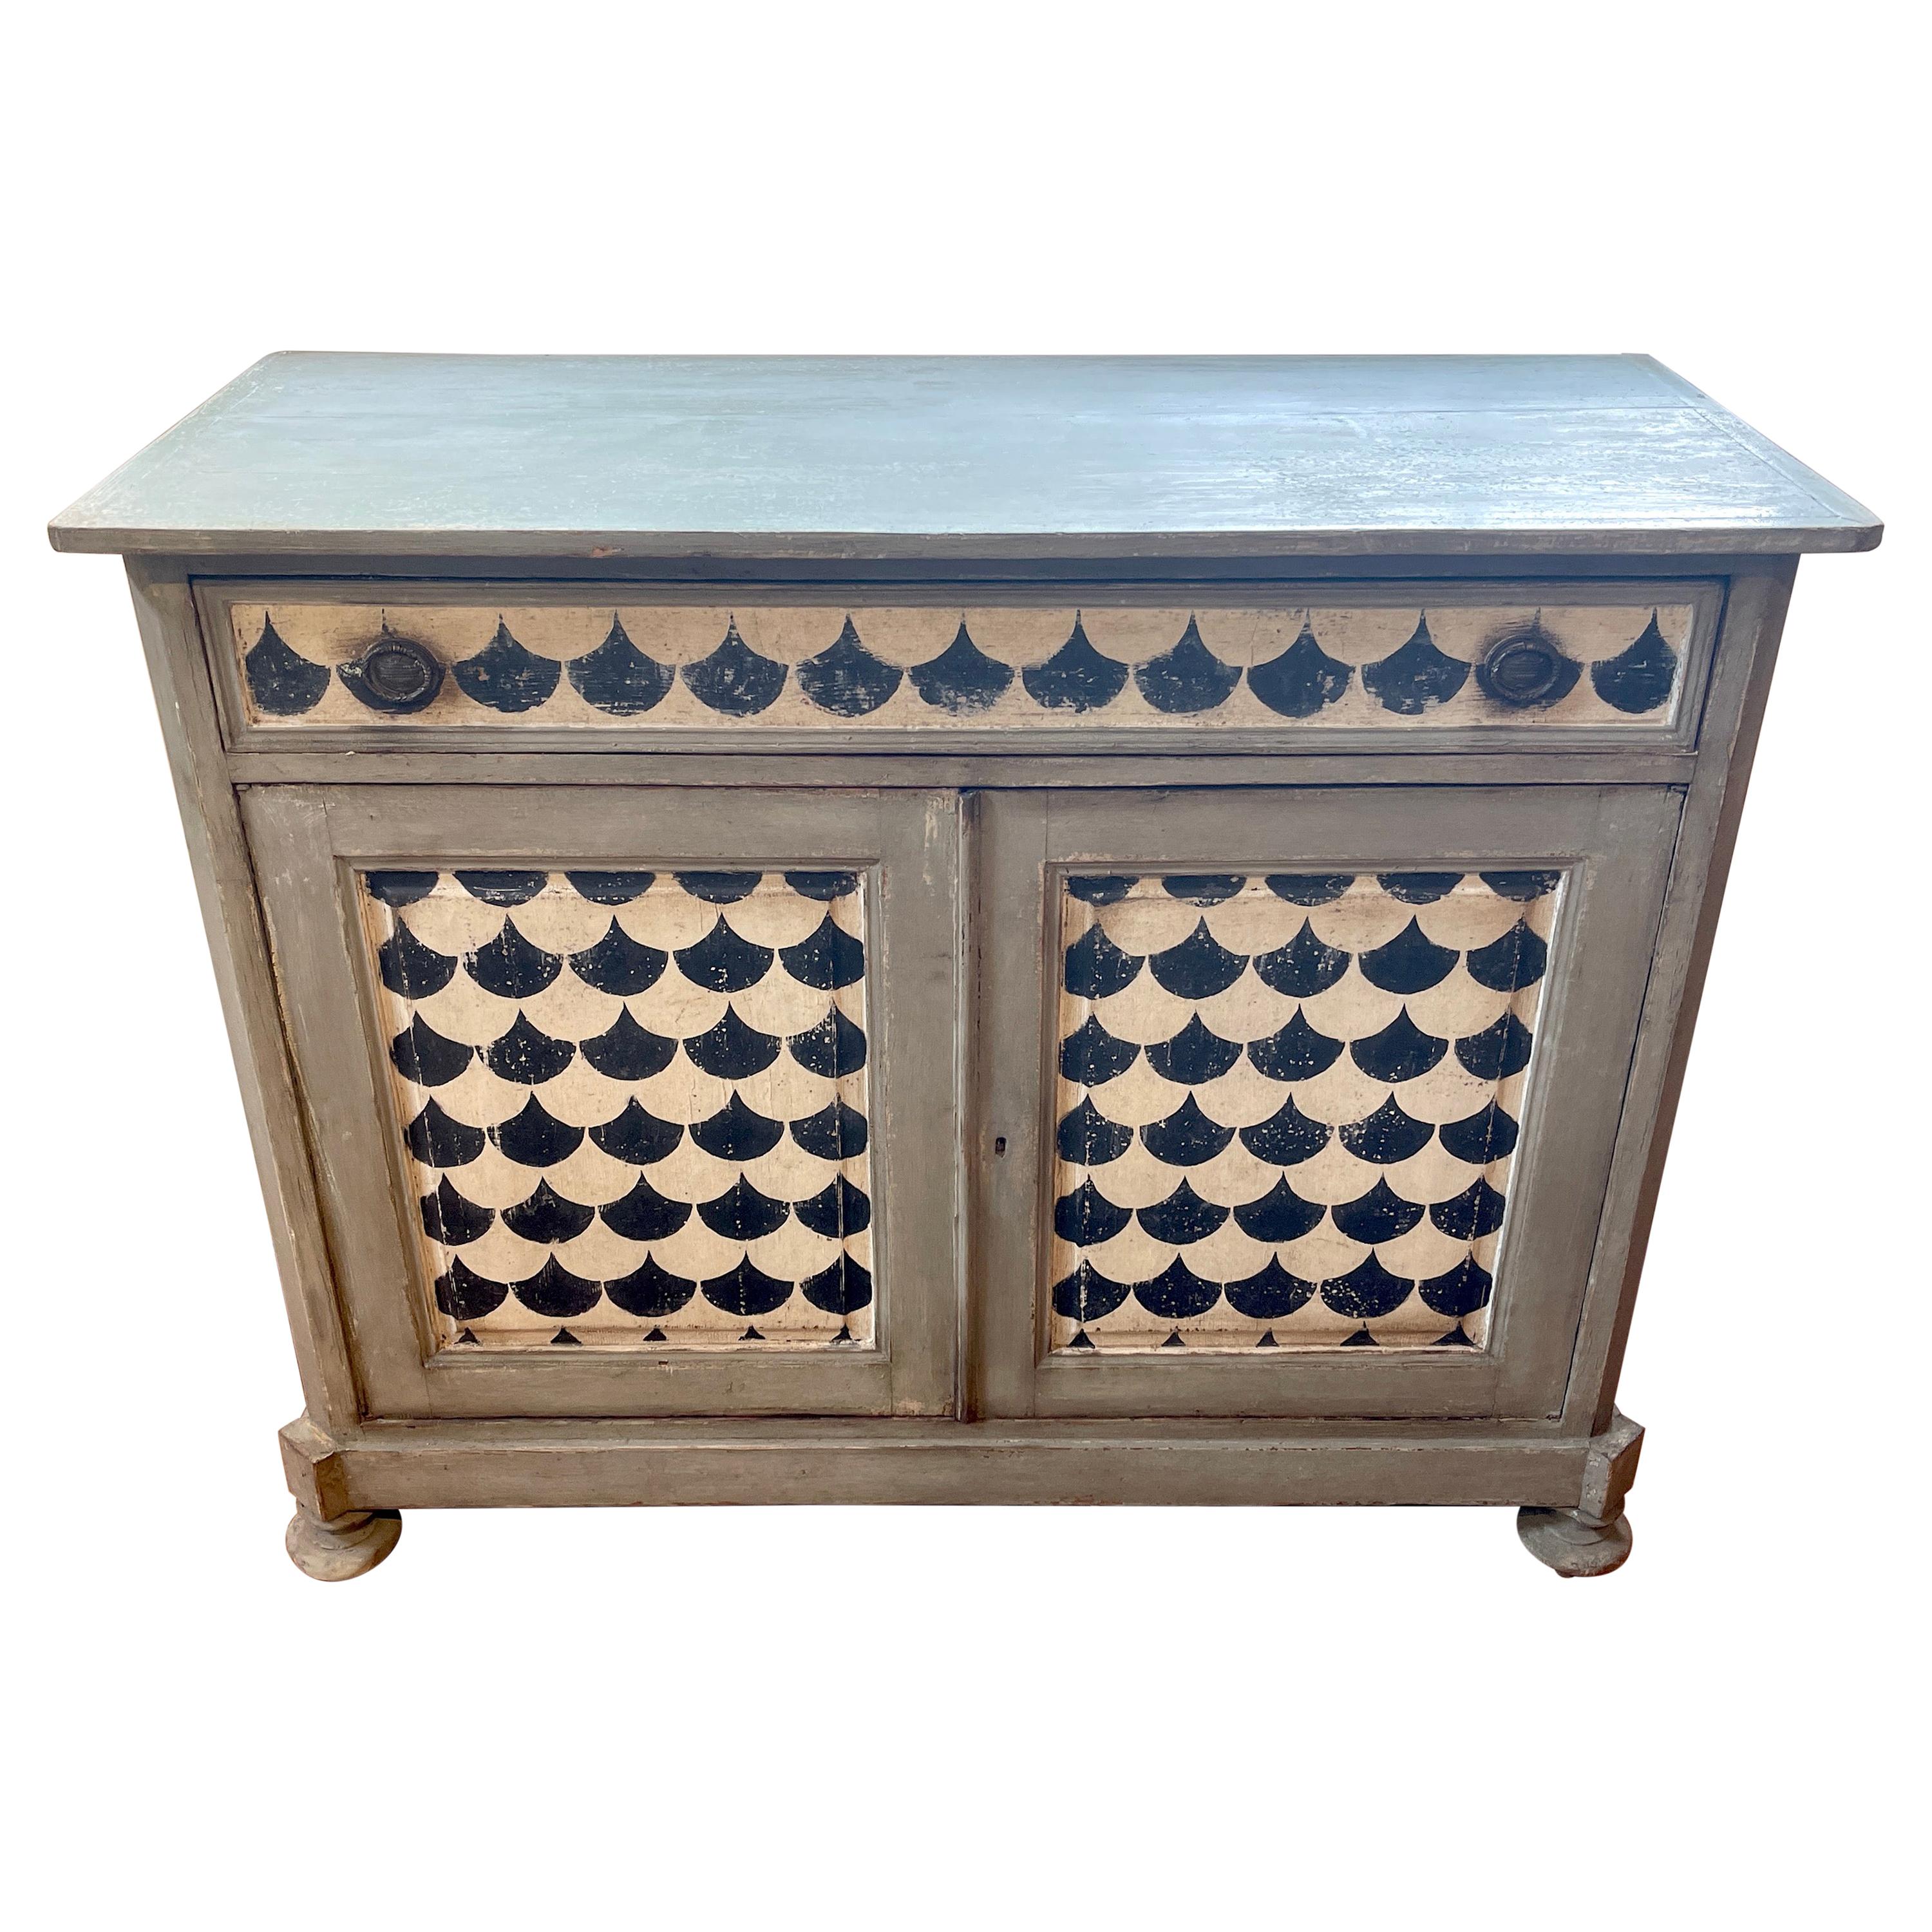 18th C Italian Neoclassical Black & White Painted Chest For Sale